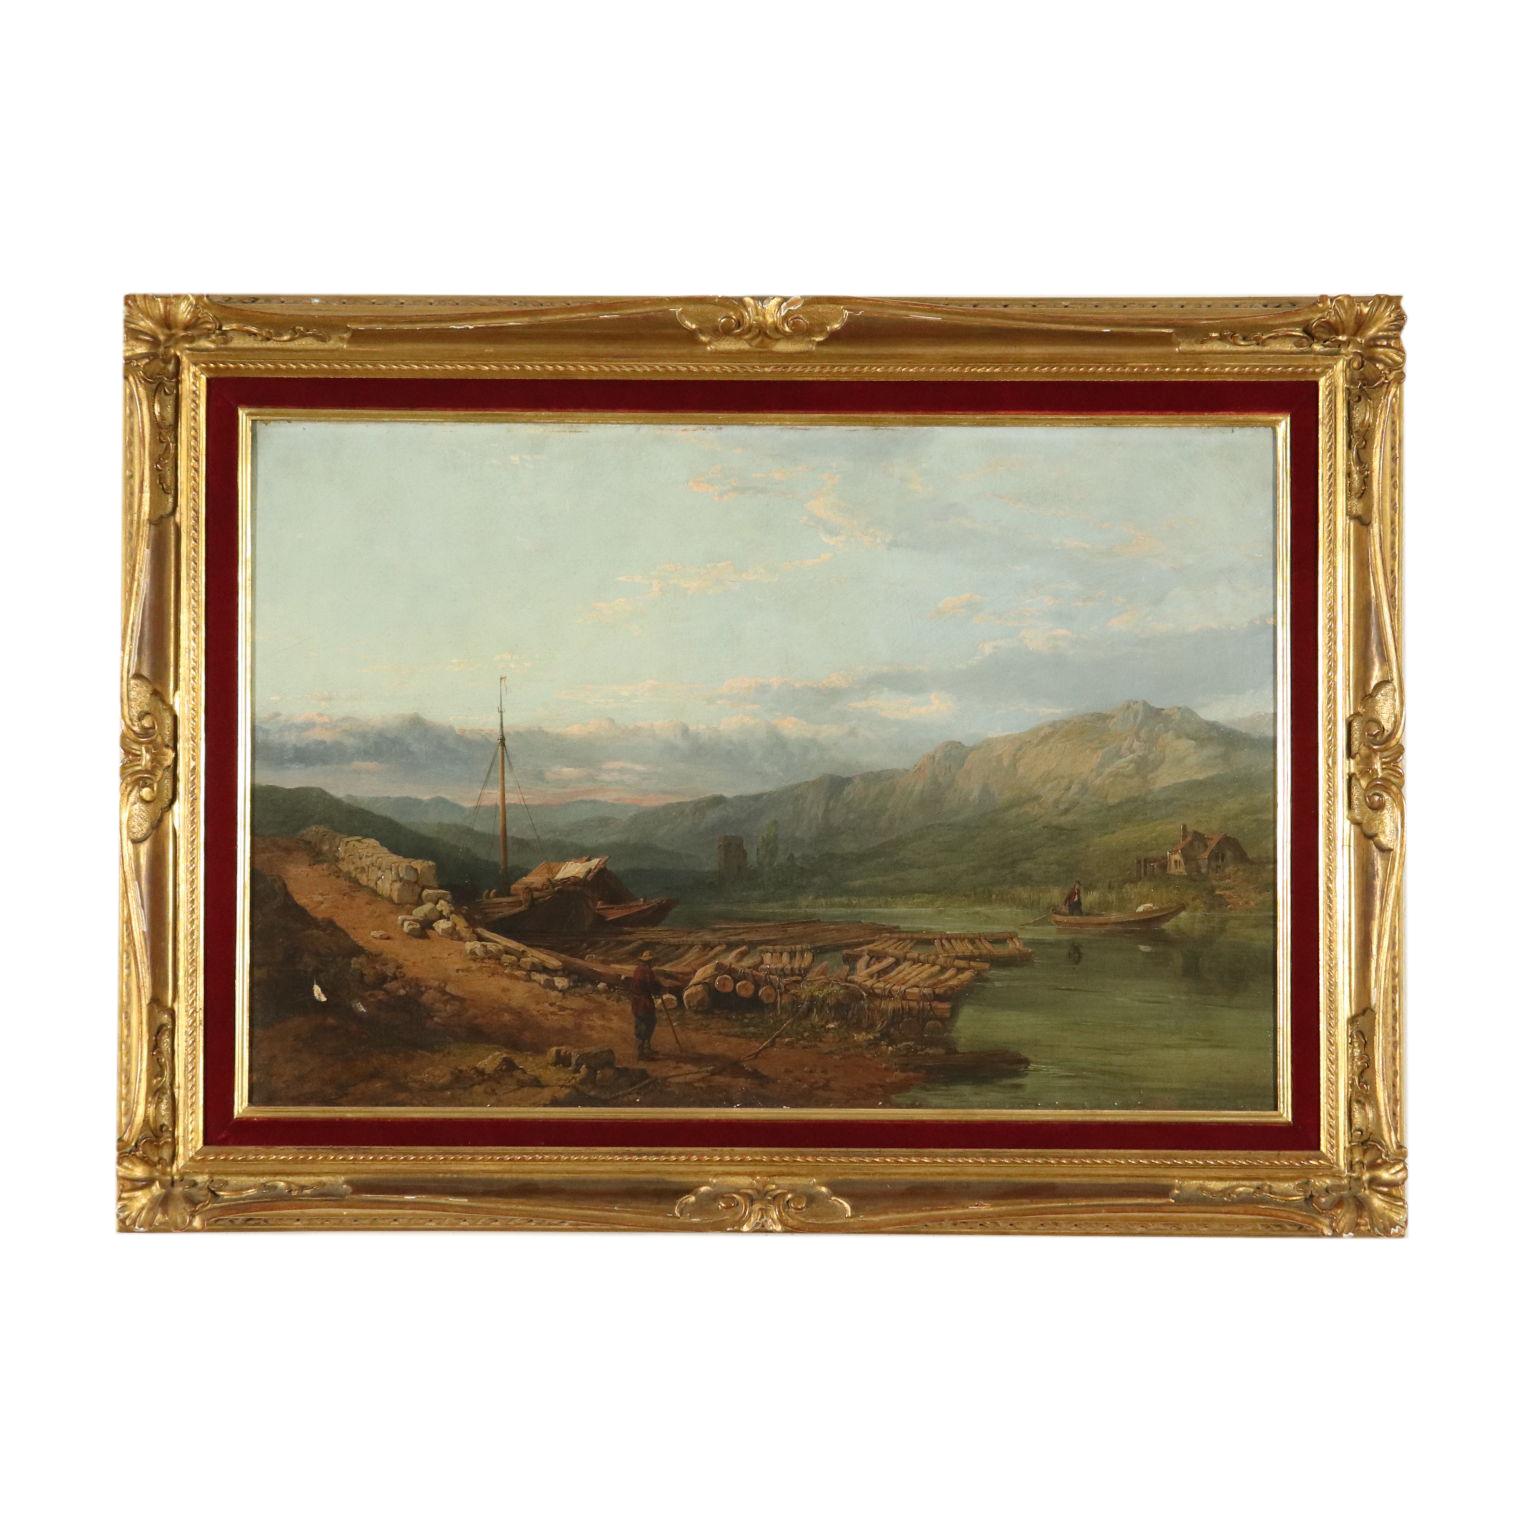 Oil painting on canvas. Signature and date in the lower left corner. The English painter George Clarkson Stanfied - specialized in landscapes and marine landscape like his father - stood up for the topographical glimpses of many places of Europe he